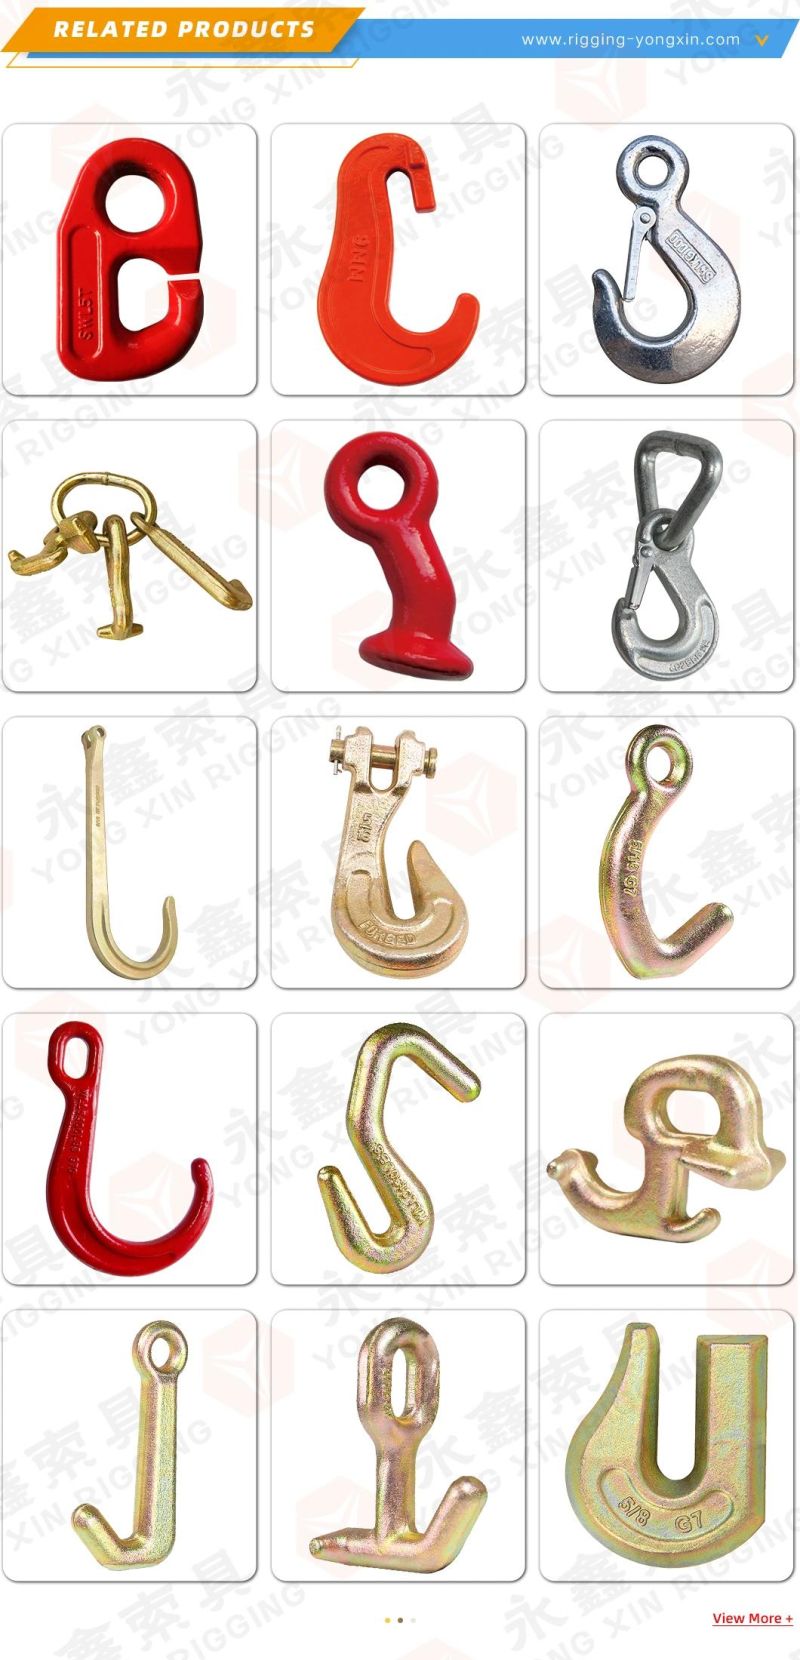 Hot Sale Forged Safety Hook with Triangle Ring, Forged Crane Equipment Hooks, Heavy Duty Hooks, 10t Capicity